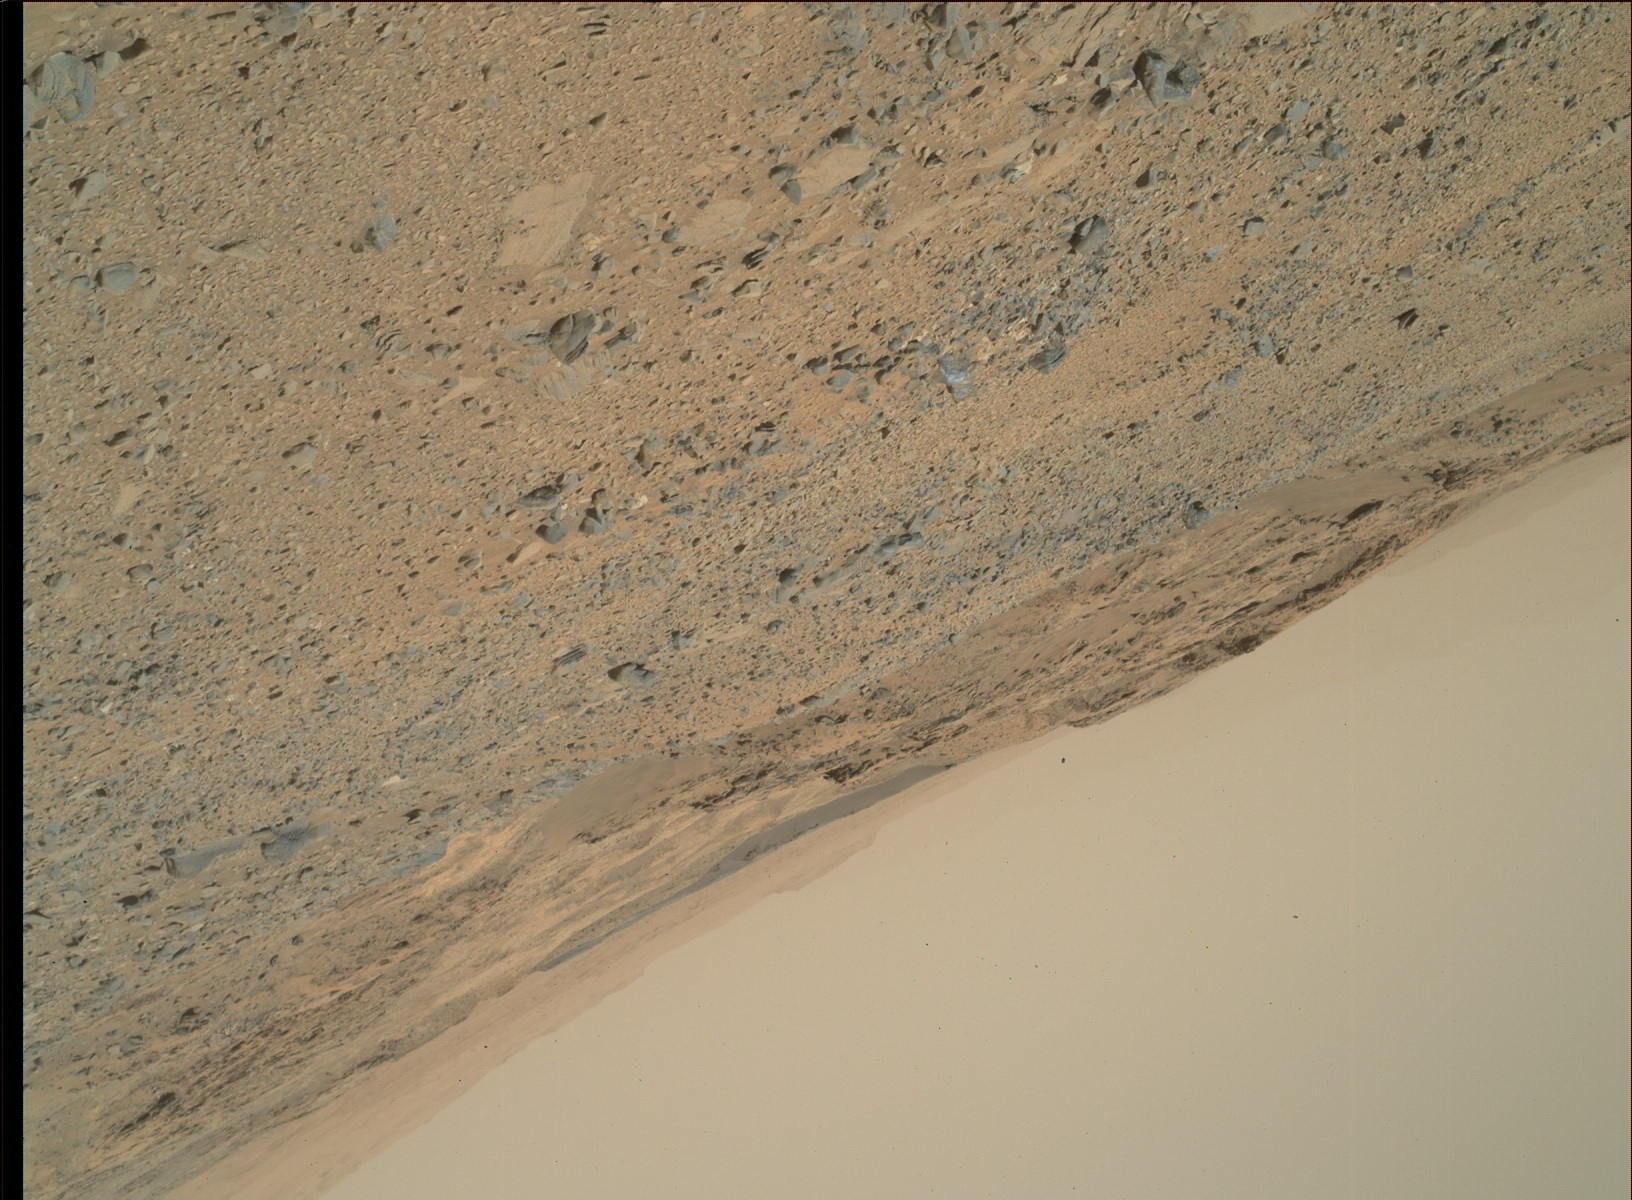 Nasa's Mars rover Curiosity acquired this image using its Mars Hand Lens Imager (MAHLI) on Sol 1078